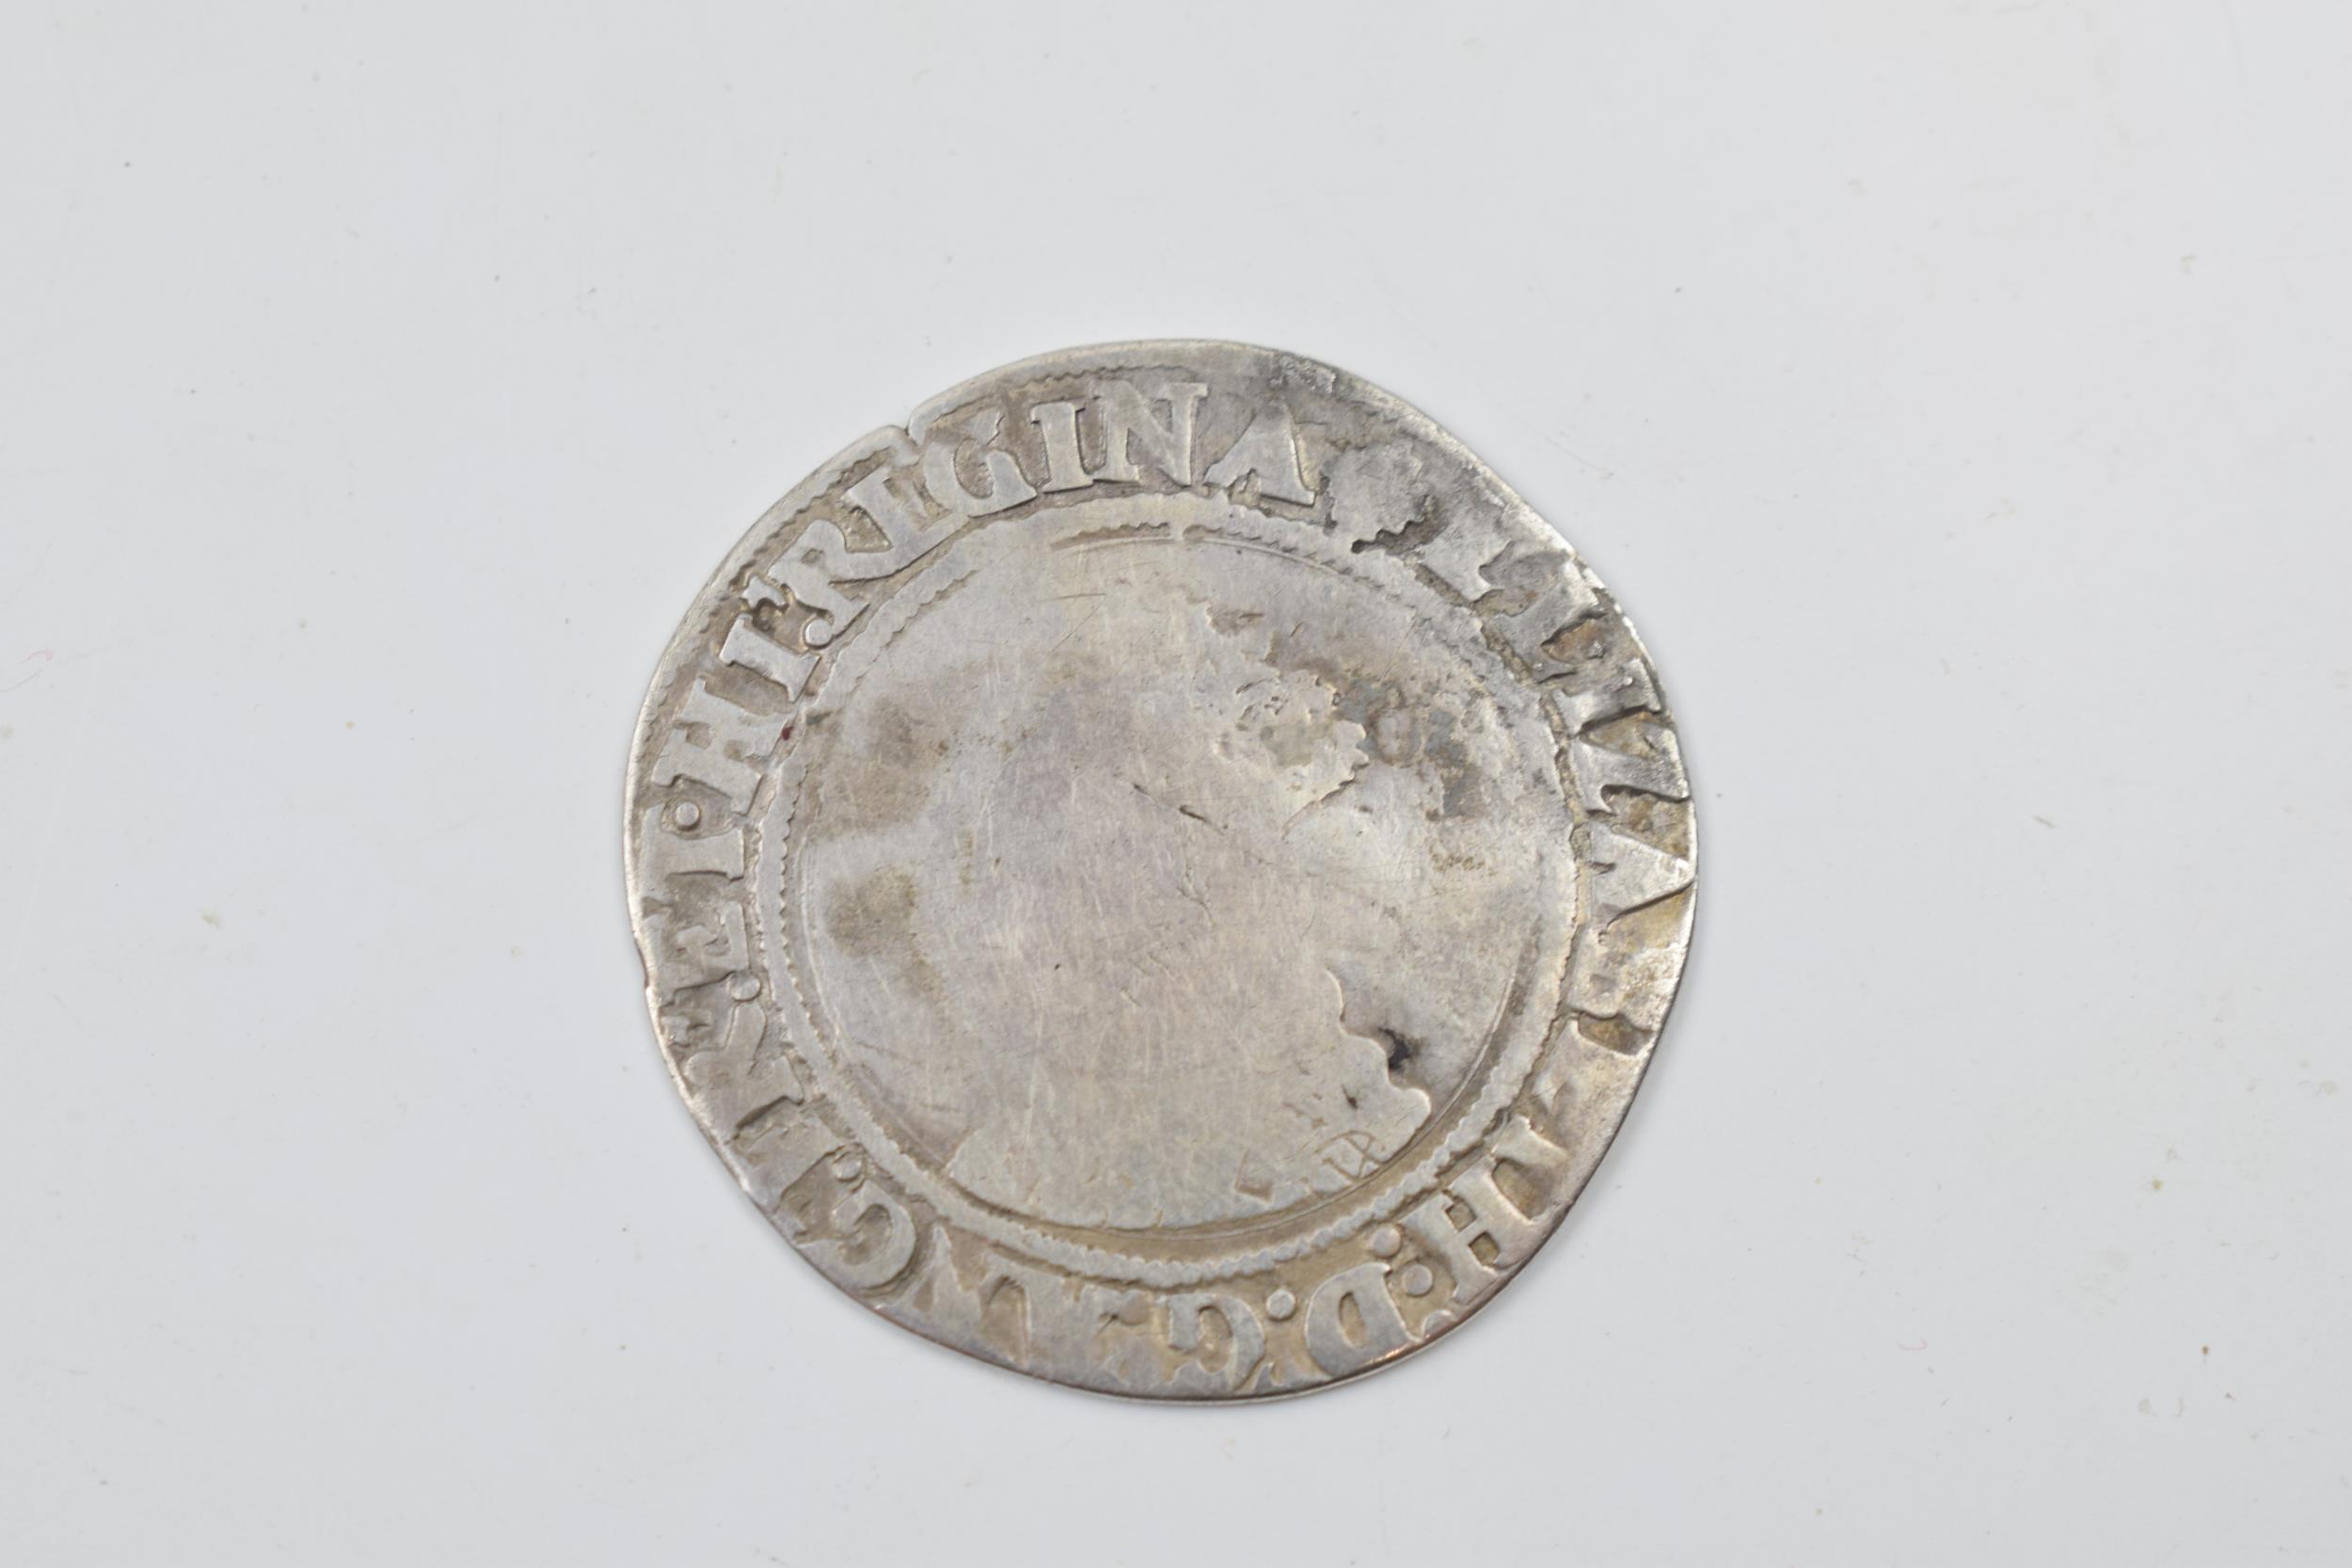 Queen Elizabeth I Silver Shilling 2nd issue 1560 - 61. Bust 3c. Full Flange. Diameter 31.9mm. Weight - Image 2 of 3